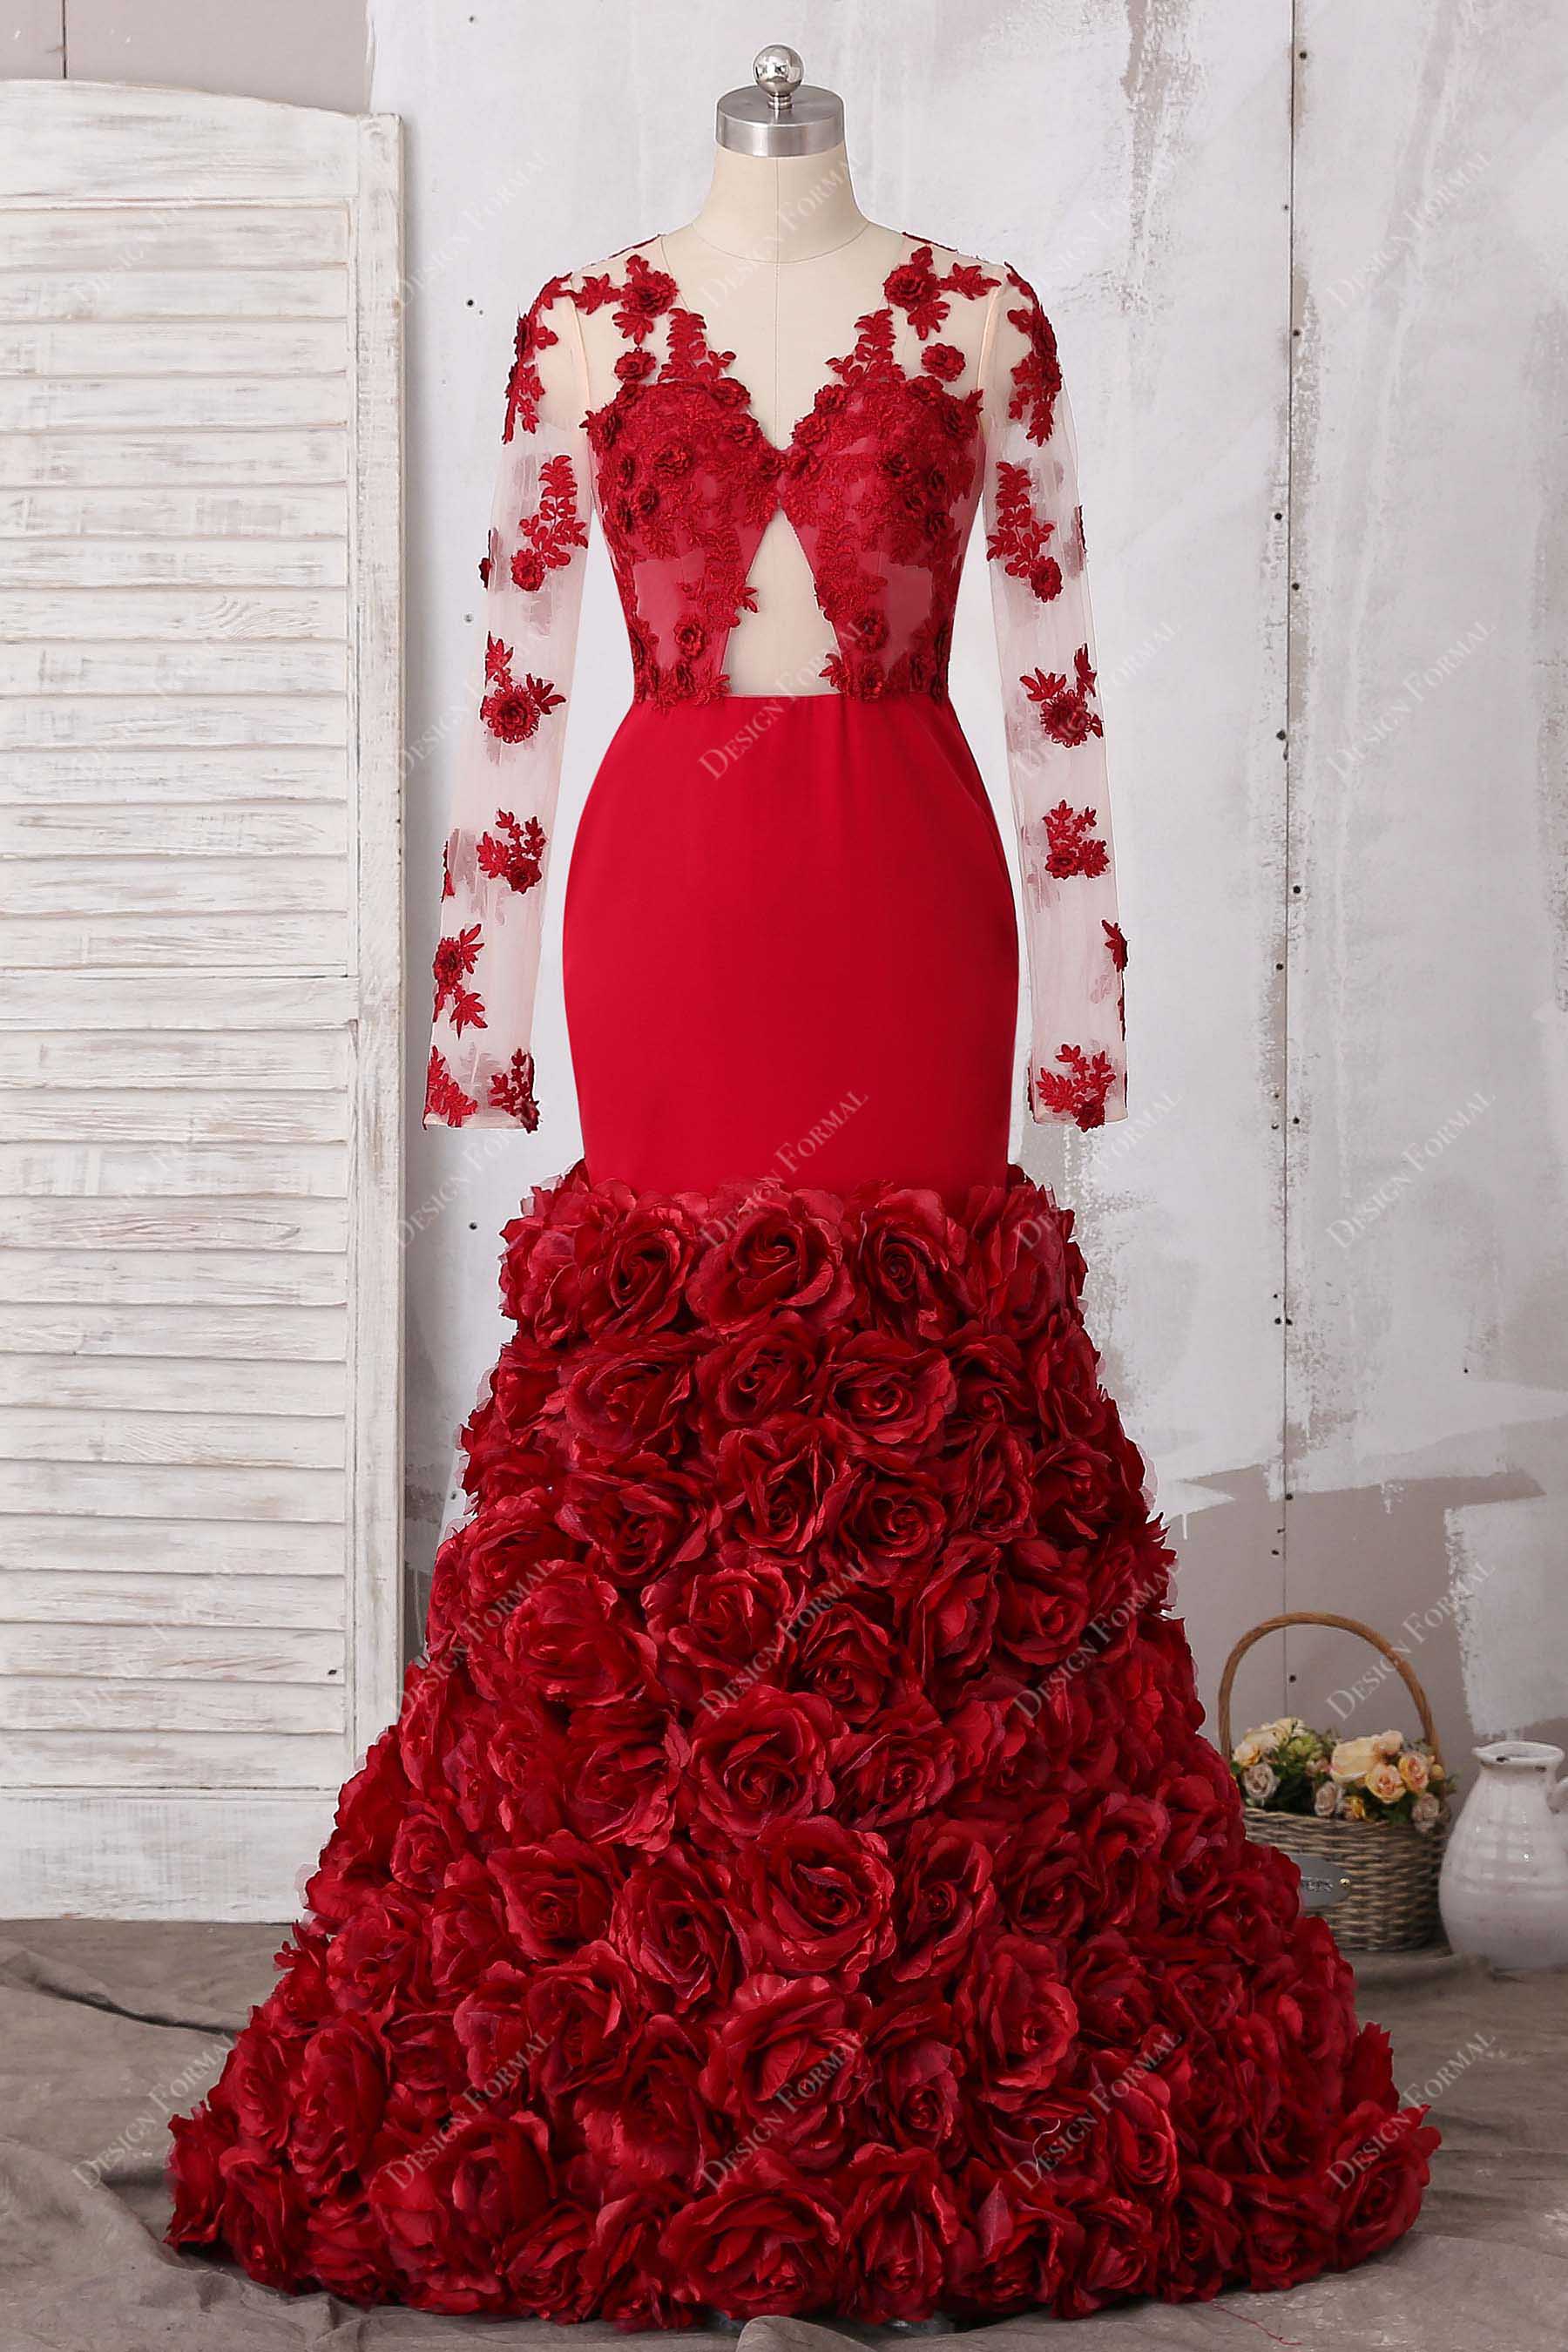 Prom Dress With Red Roses Top Sellers | bellvalefarms.com